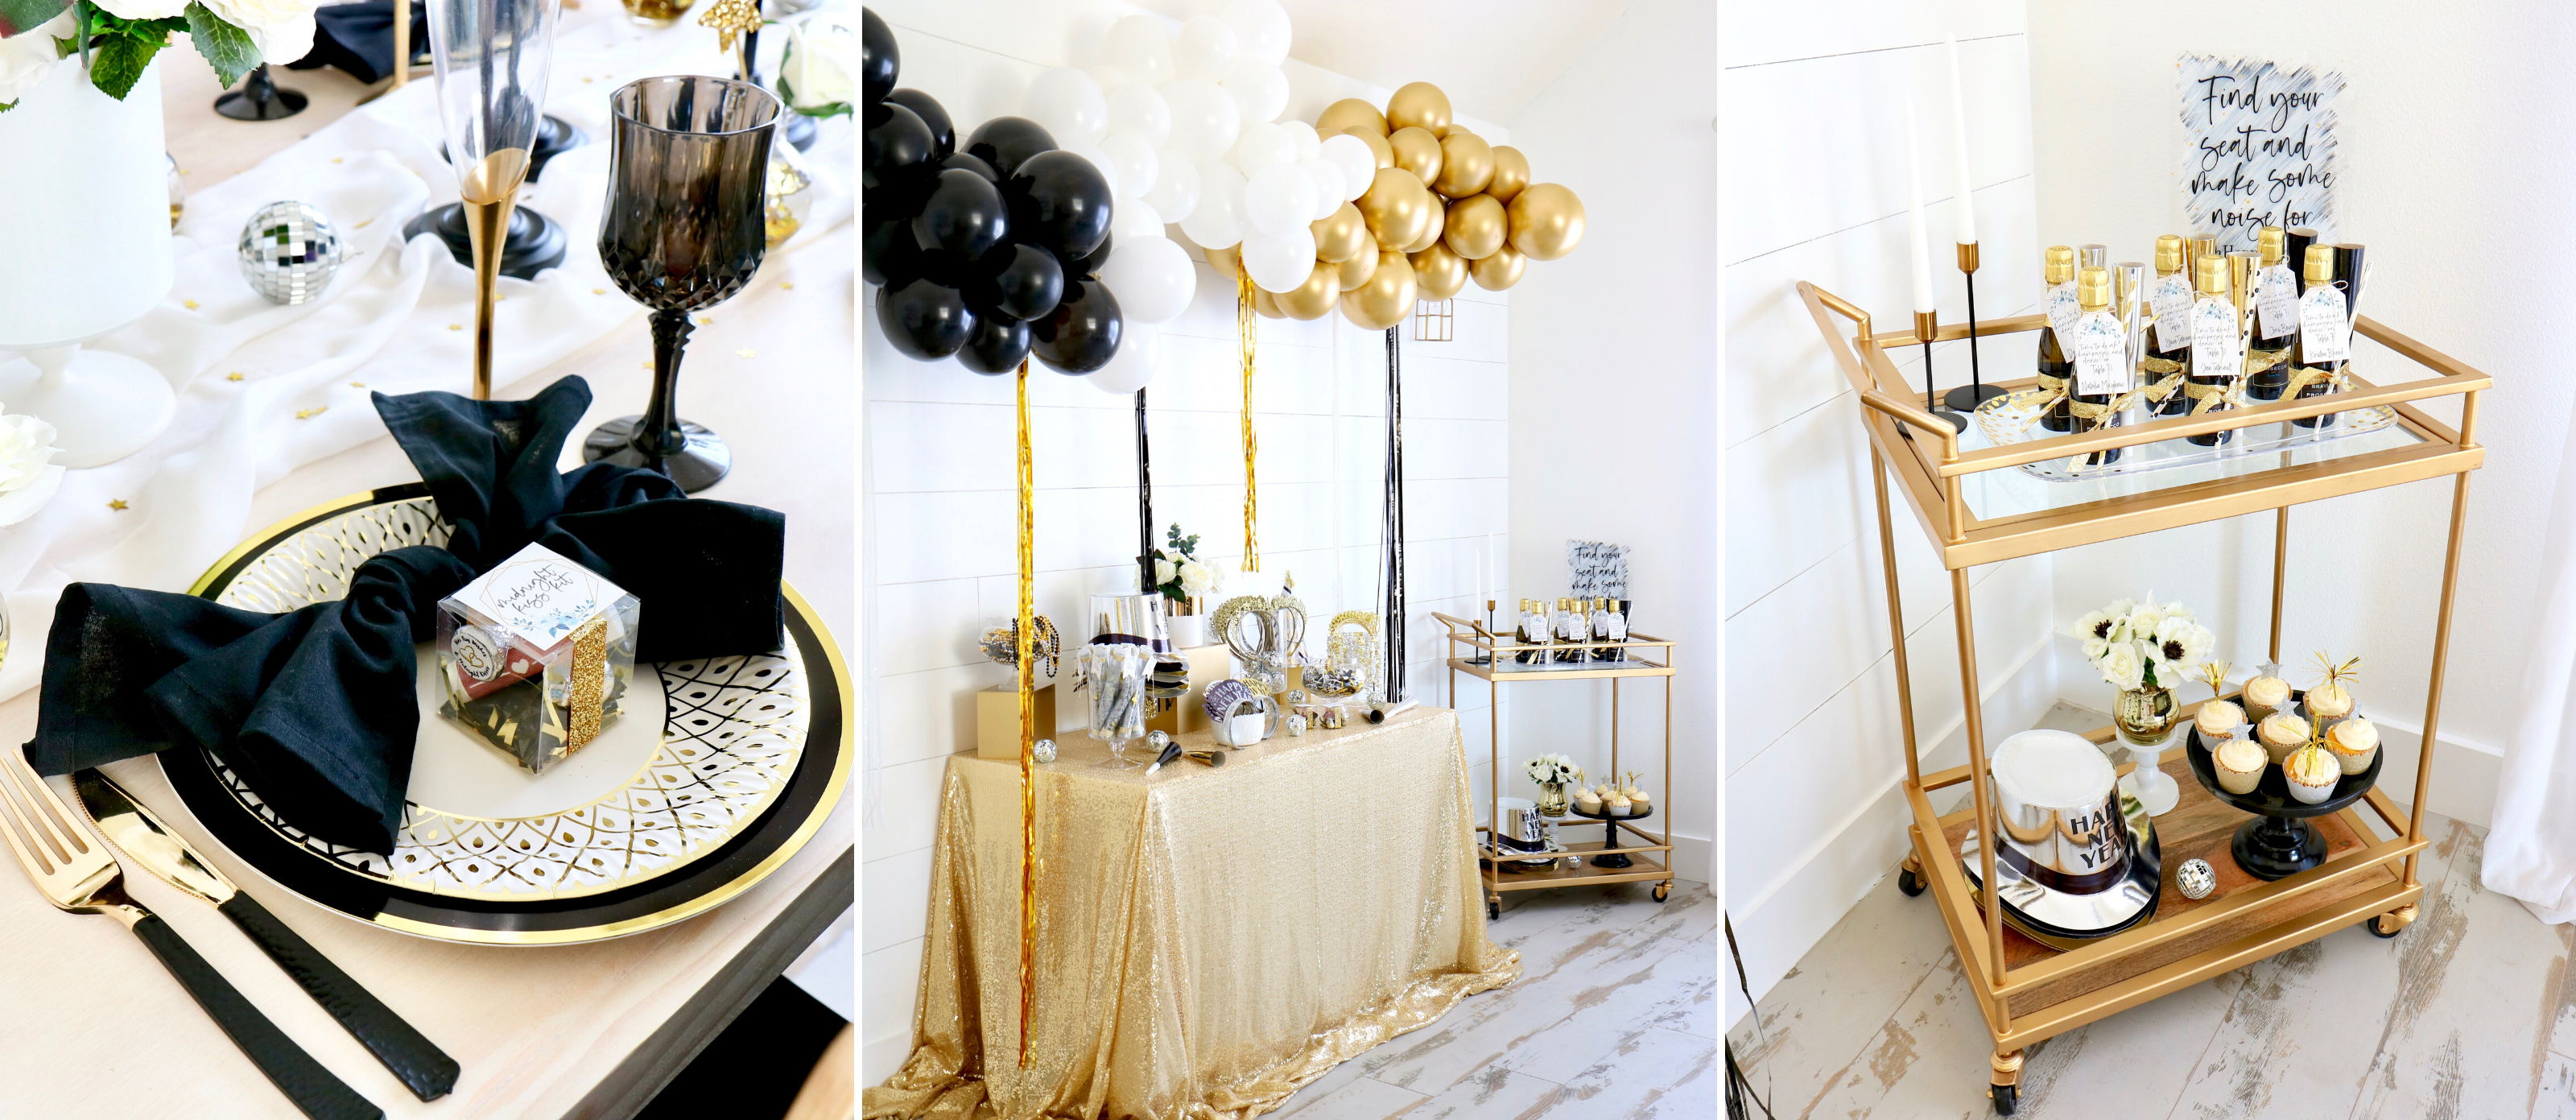 Black, white and gold party with glitter gold bottle centerpieces  Black  and gold centerpieces, Black and gold party decorations, Gold party